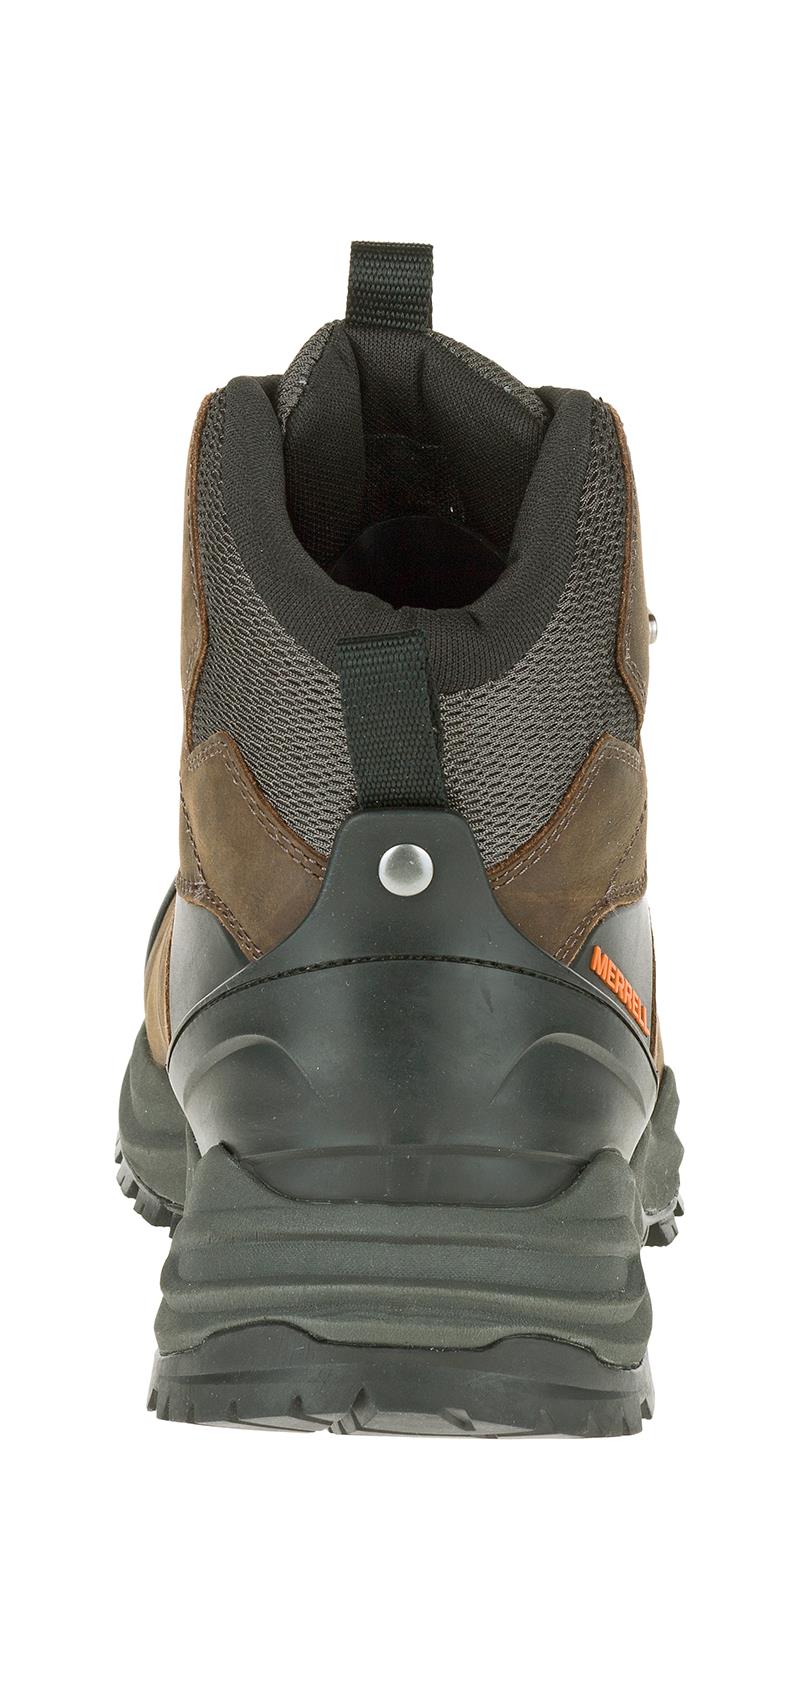 Merrell Phaserbound Mens Waterproof Backpacking Boots-5